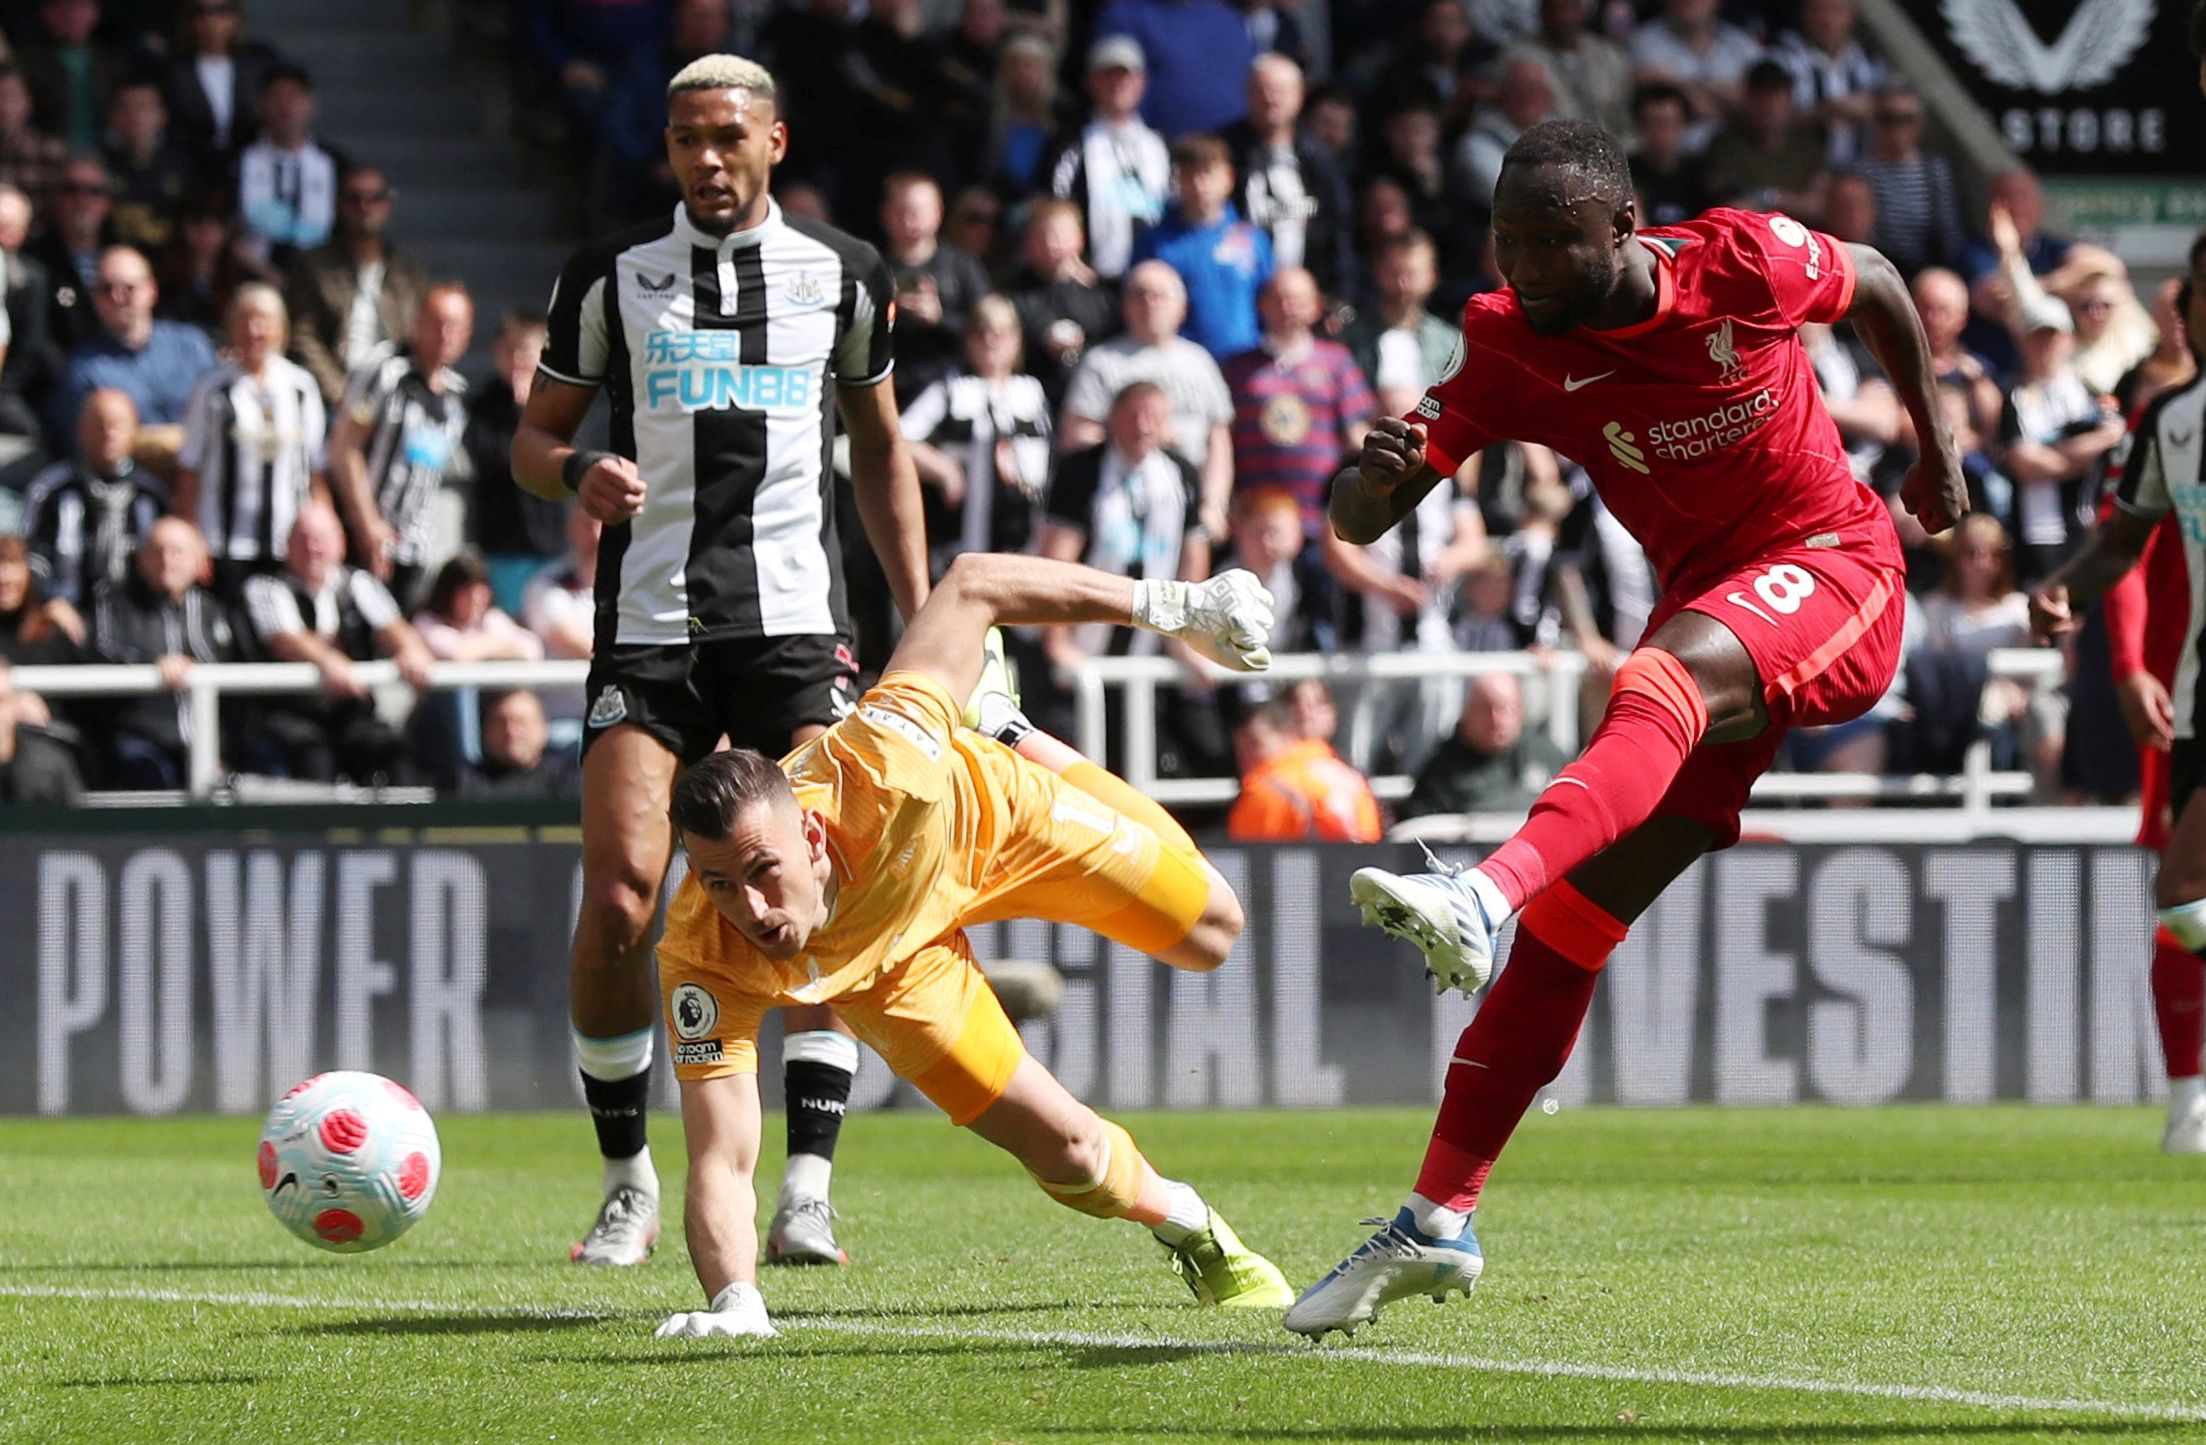 Soccer Football - Premier League - Newcastle United v Liverpool - St James' Park, Newcastle, Britain - April 30, 2022 Liverpool's Naby Keita scores their first goal REUTERS/Scott Heppell EDITORIAL USE ONLY. No use with unauthorized audio, video, data, fixture lists, club/league logos or 'live' services. Online in-match use limited to 75 images, no video emulation. No use in betting, games or single club /league/player publications.  Please contact your account representative for further details.